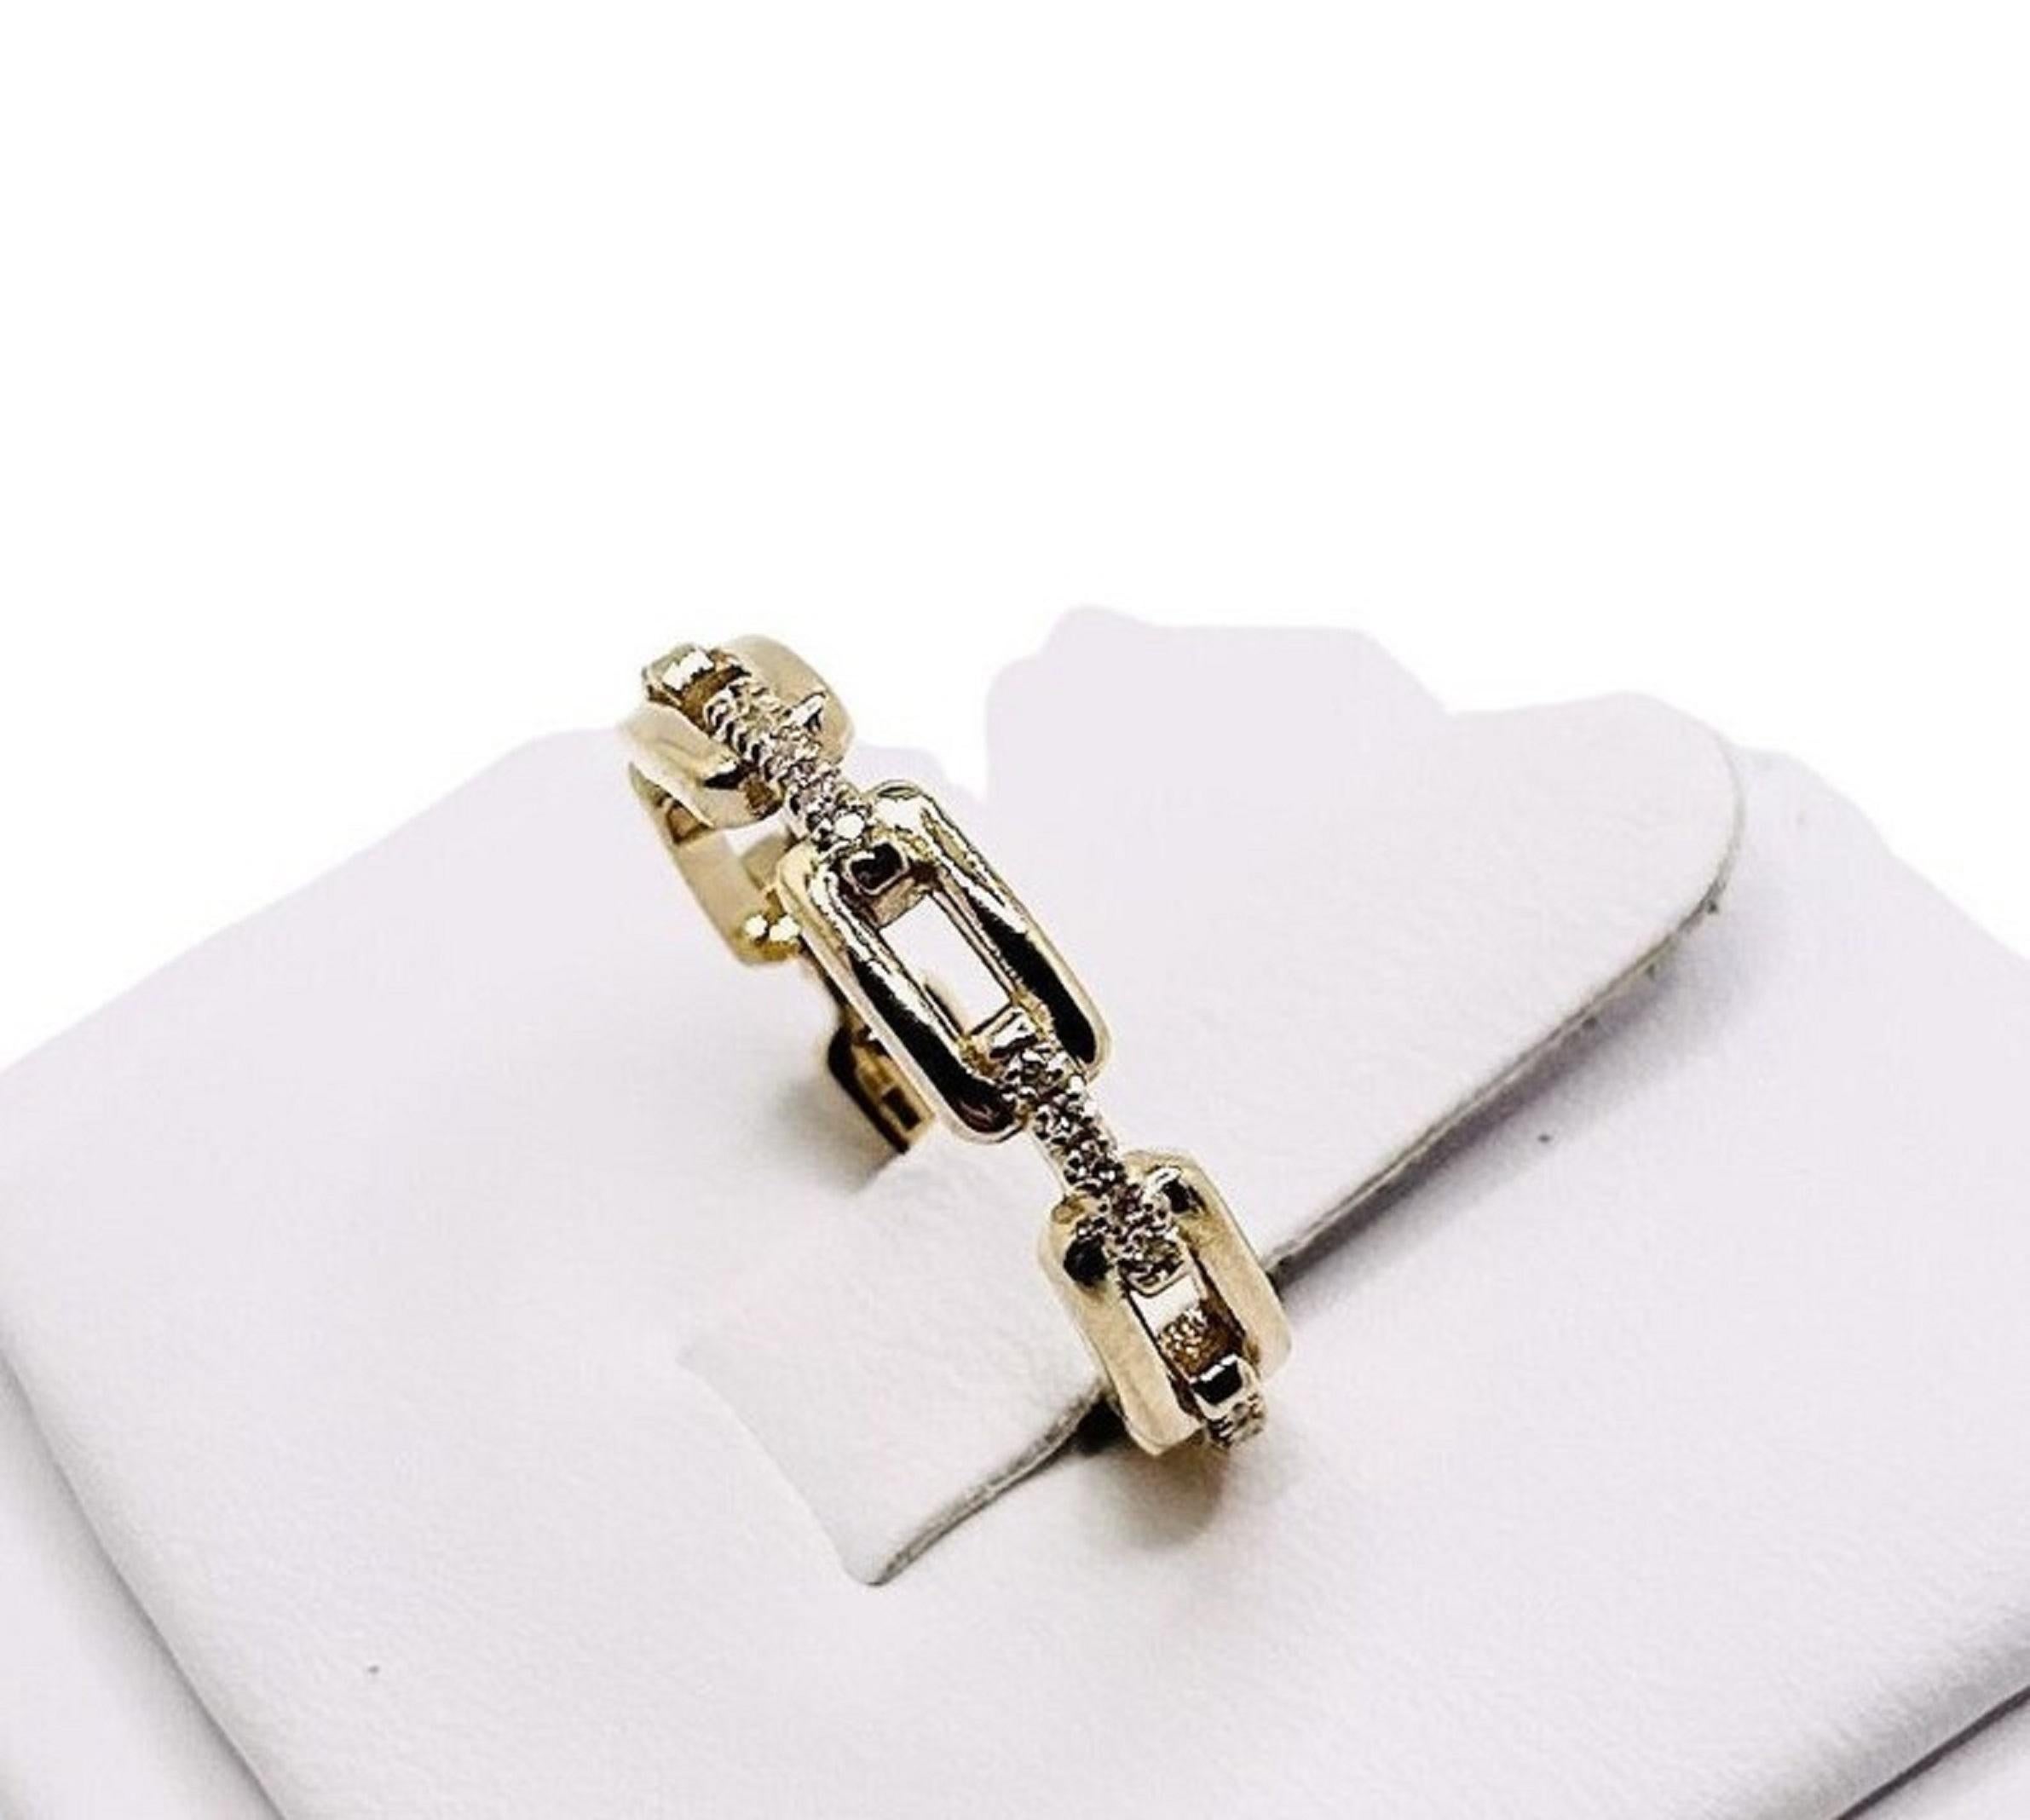 14K Yellow Gold Women's Chain Ring With Diamonds, Total Diamond Weight .12 Ct.
Product Features:
-14K Gold
-Gemstone- None
-Product Material and weight in image: 14K Gold, 7 US 3.50 Gr.
-Product weight varies in different sizes.